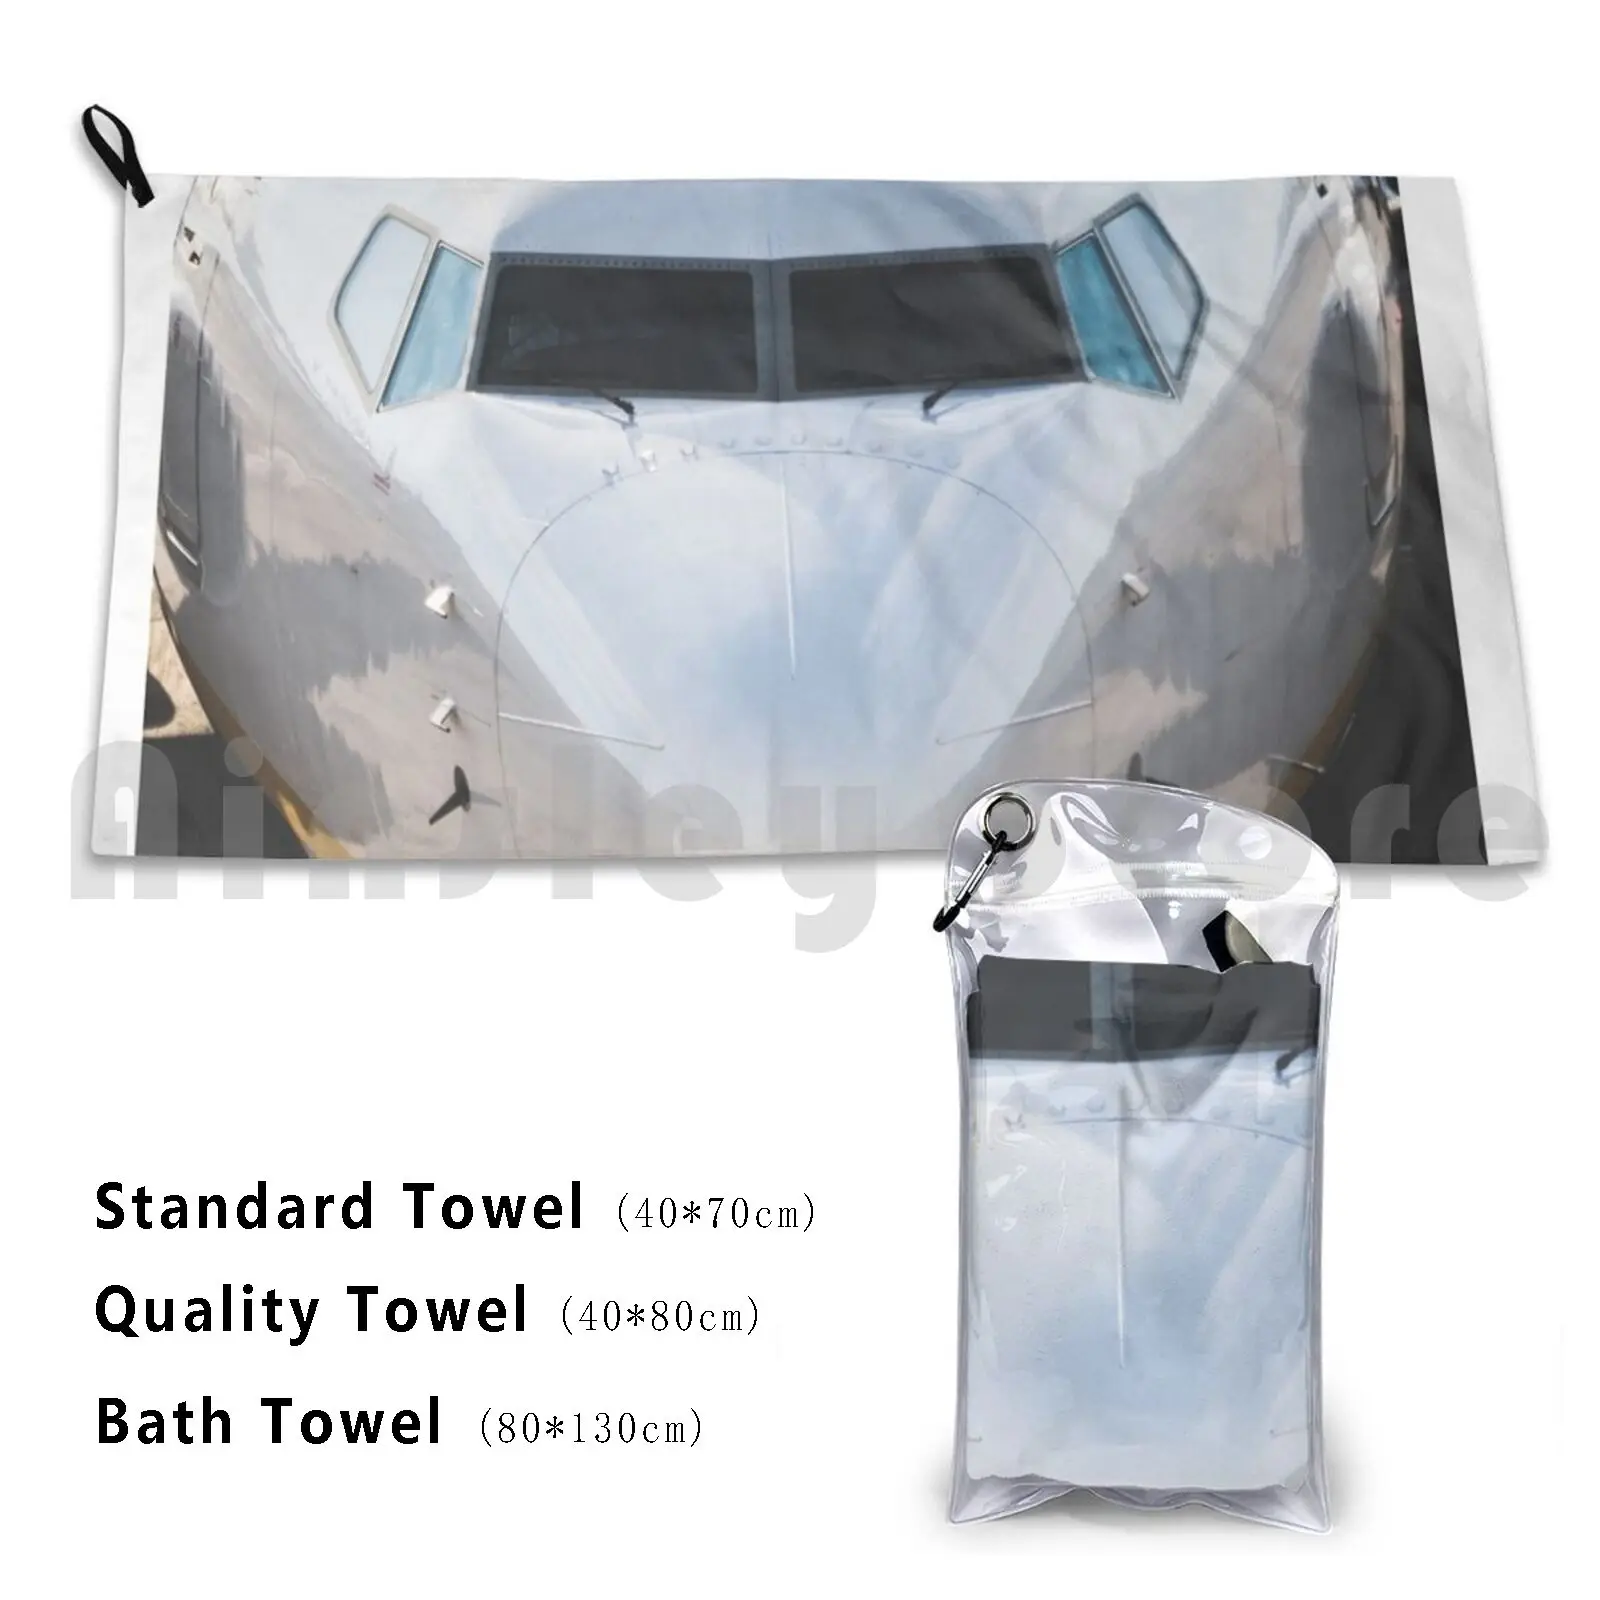 Boeing 737 Front Nose Profile Bath Towel Beach Cushion Aviation Boeing Pilot Airplane Flight Flying Airport Plane